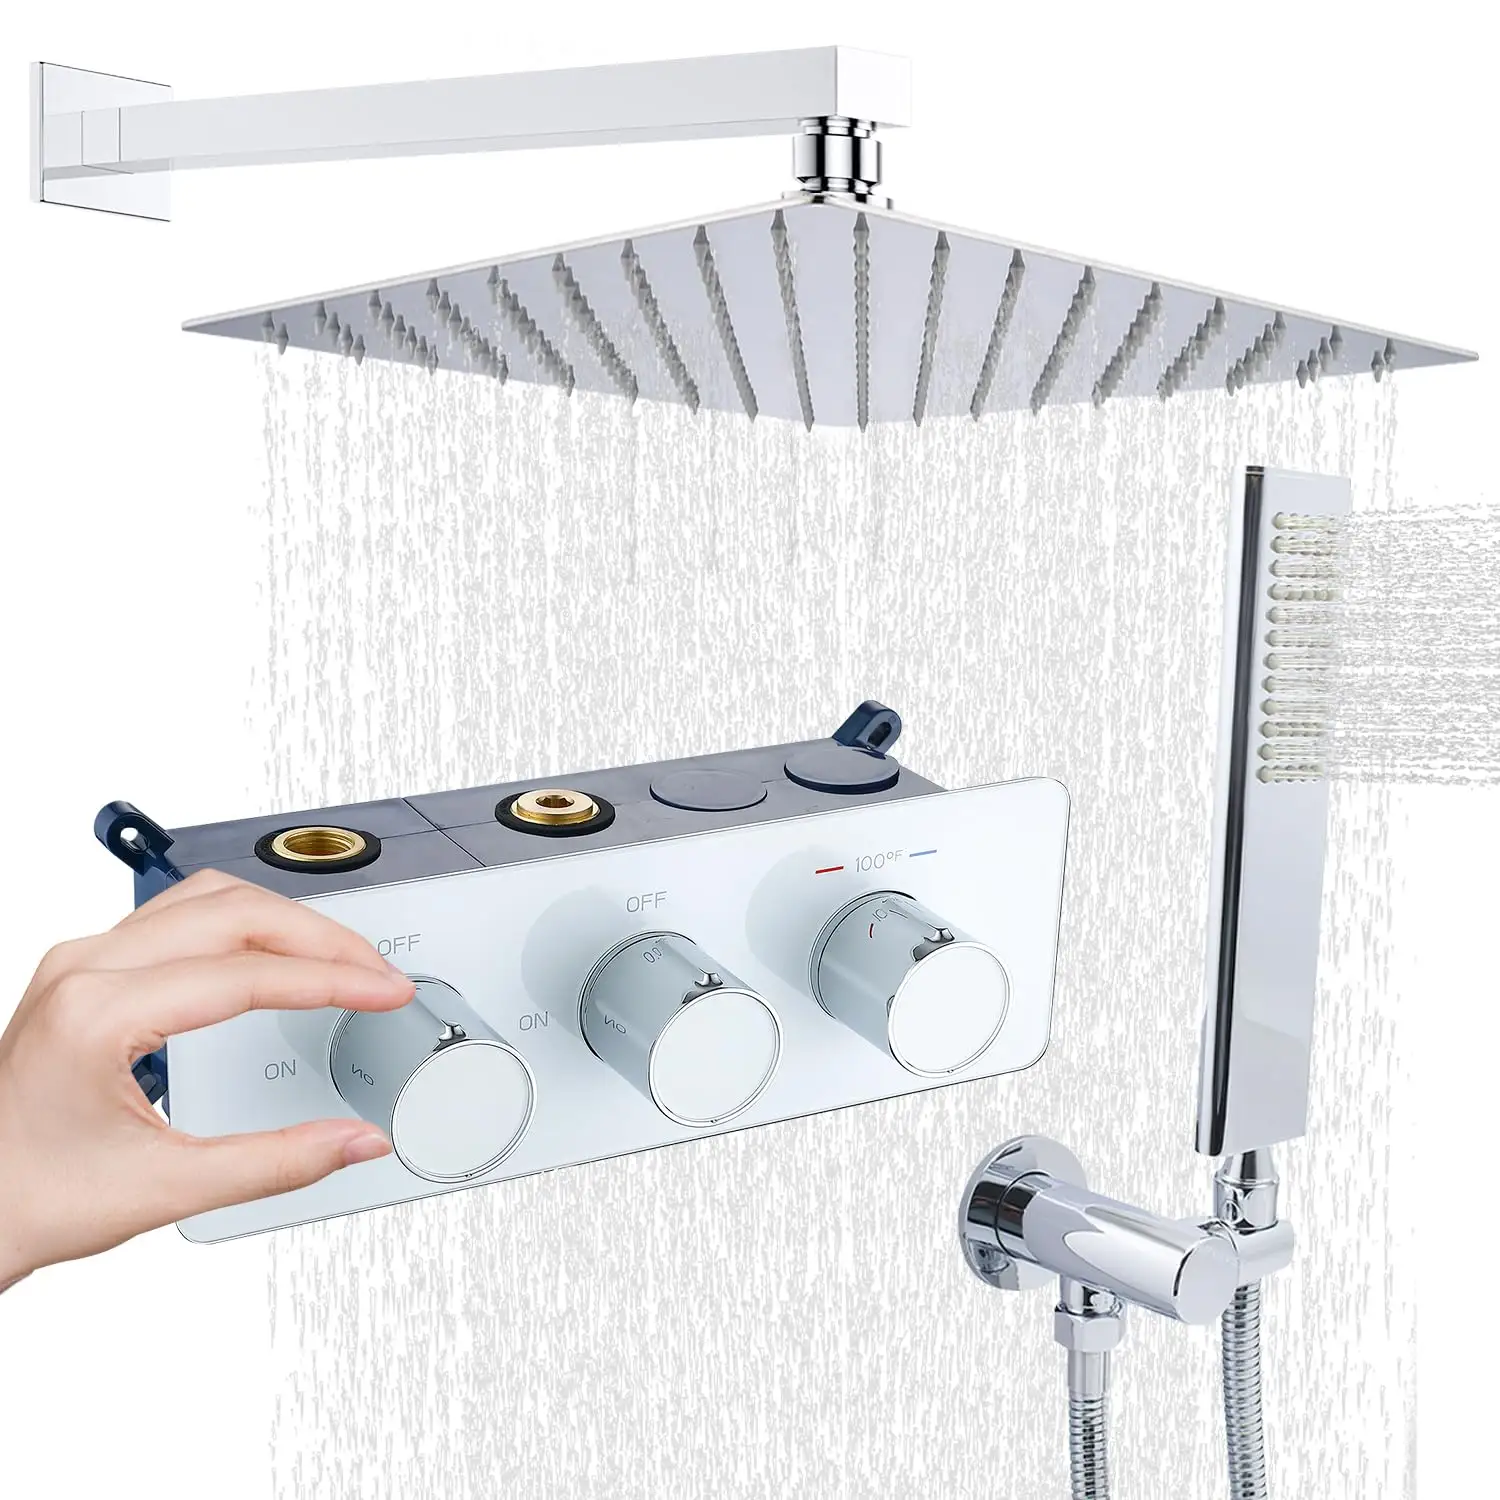 12 Inch wall mounted Dual Function Thermostatic Diverter Valve Rainfall concealed Shower Faucet System Set for bathroom